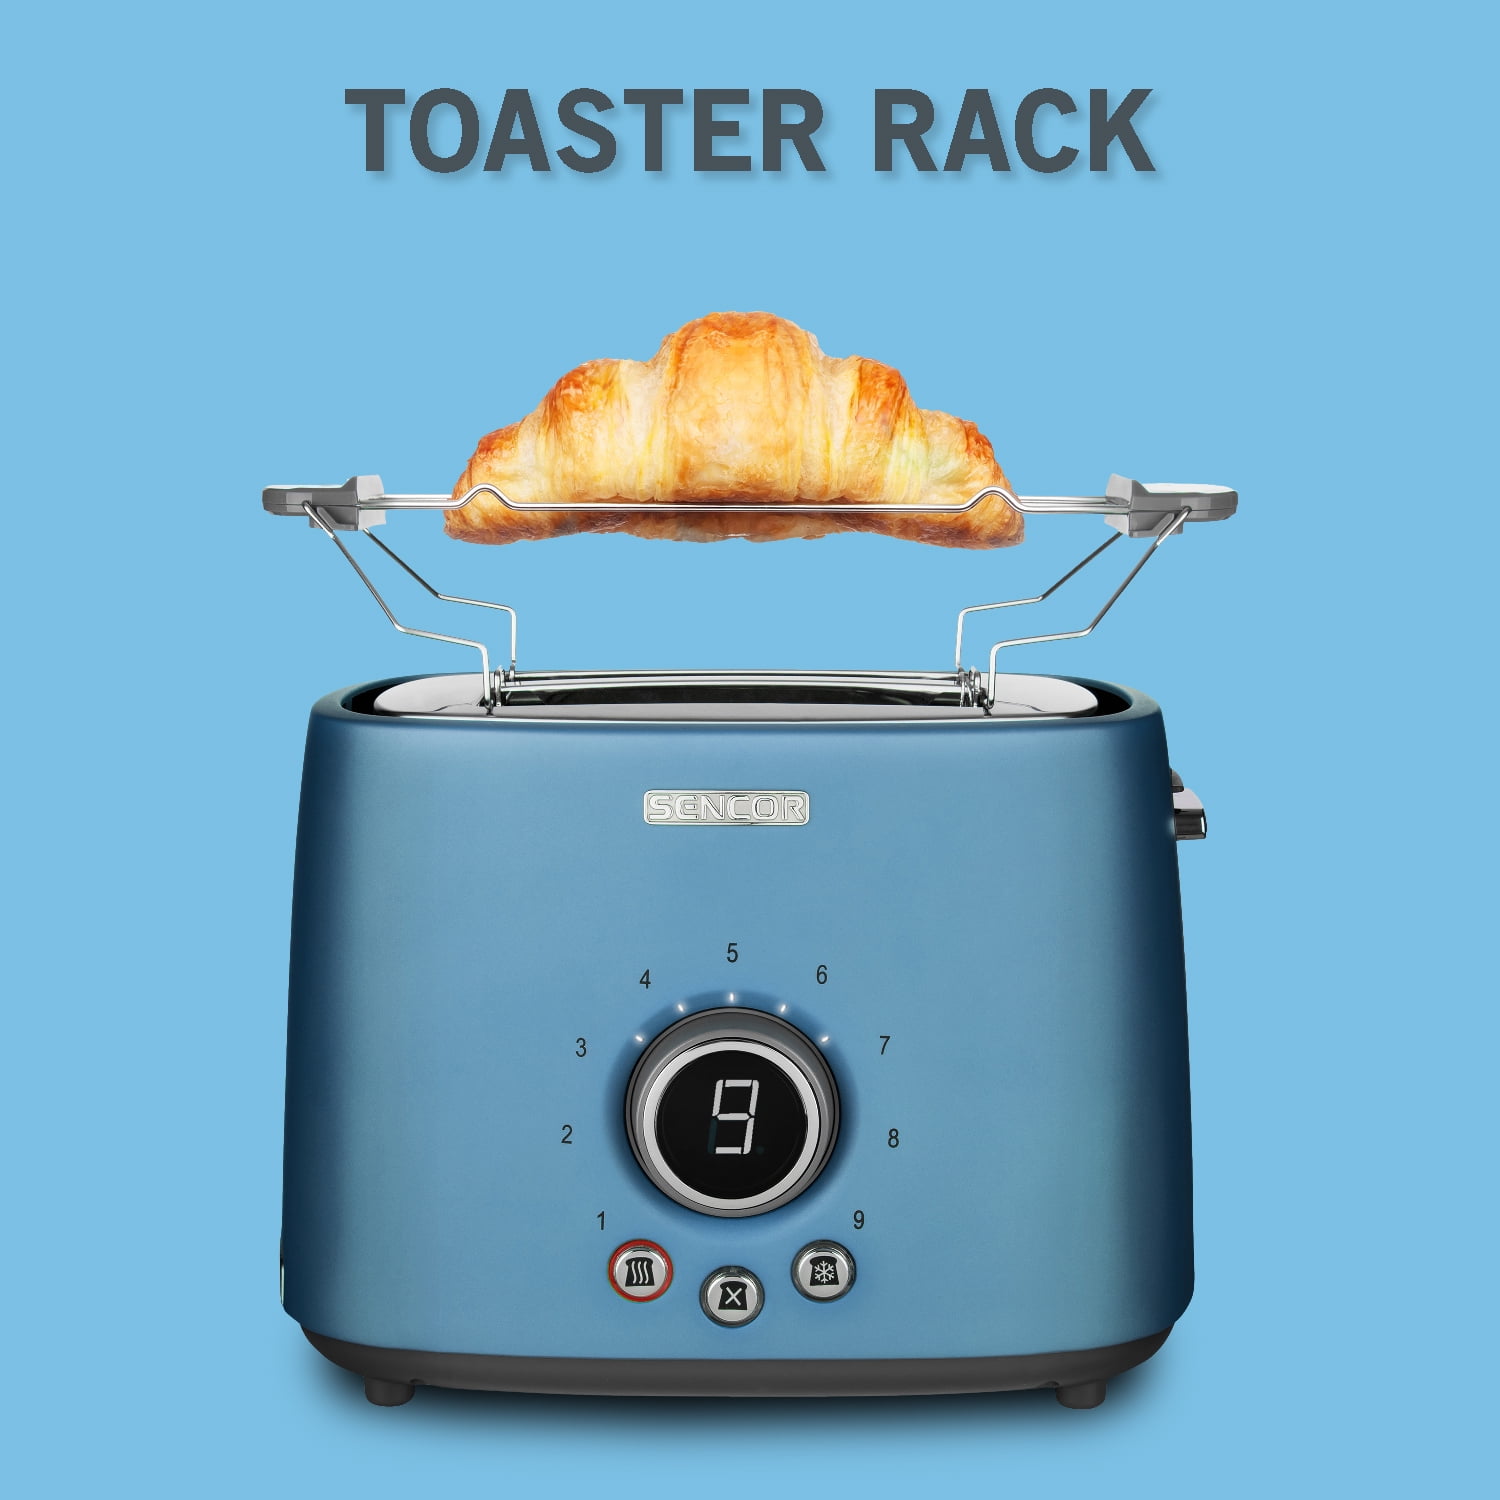 GE Stainless Steel Toaster #106808 Series C2250B1 Pre-Owned Tested Working  for Sale in Landers, CA - OfferUp